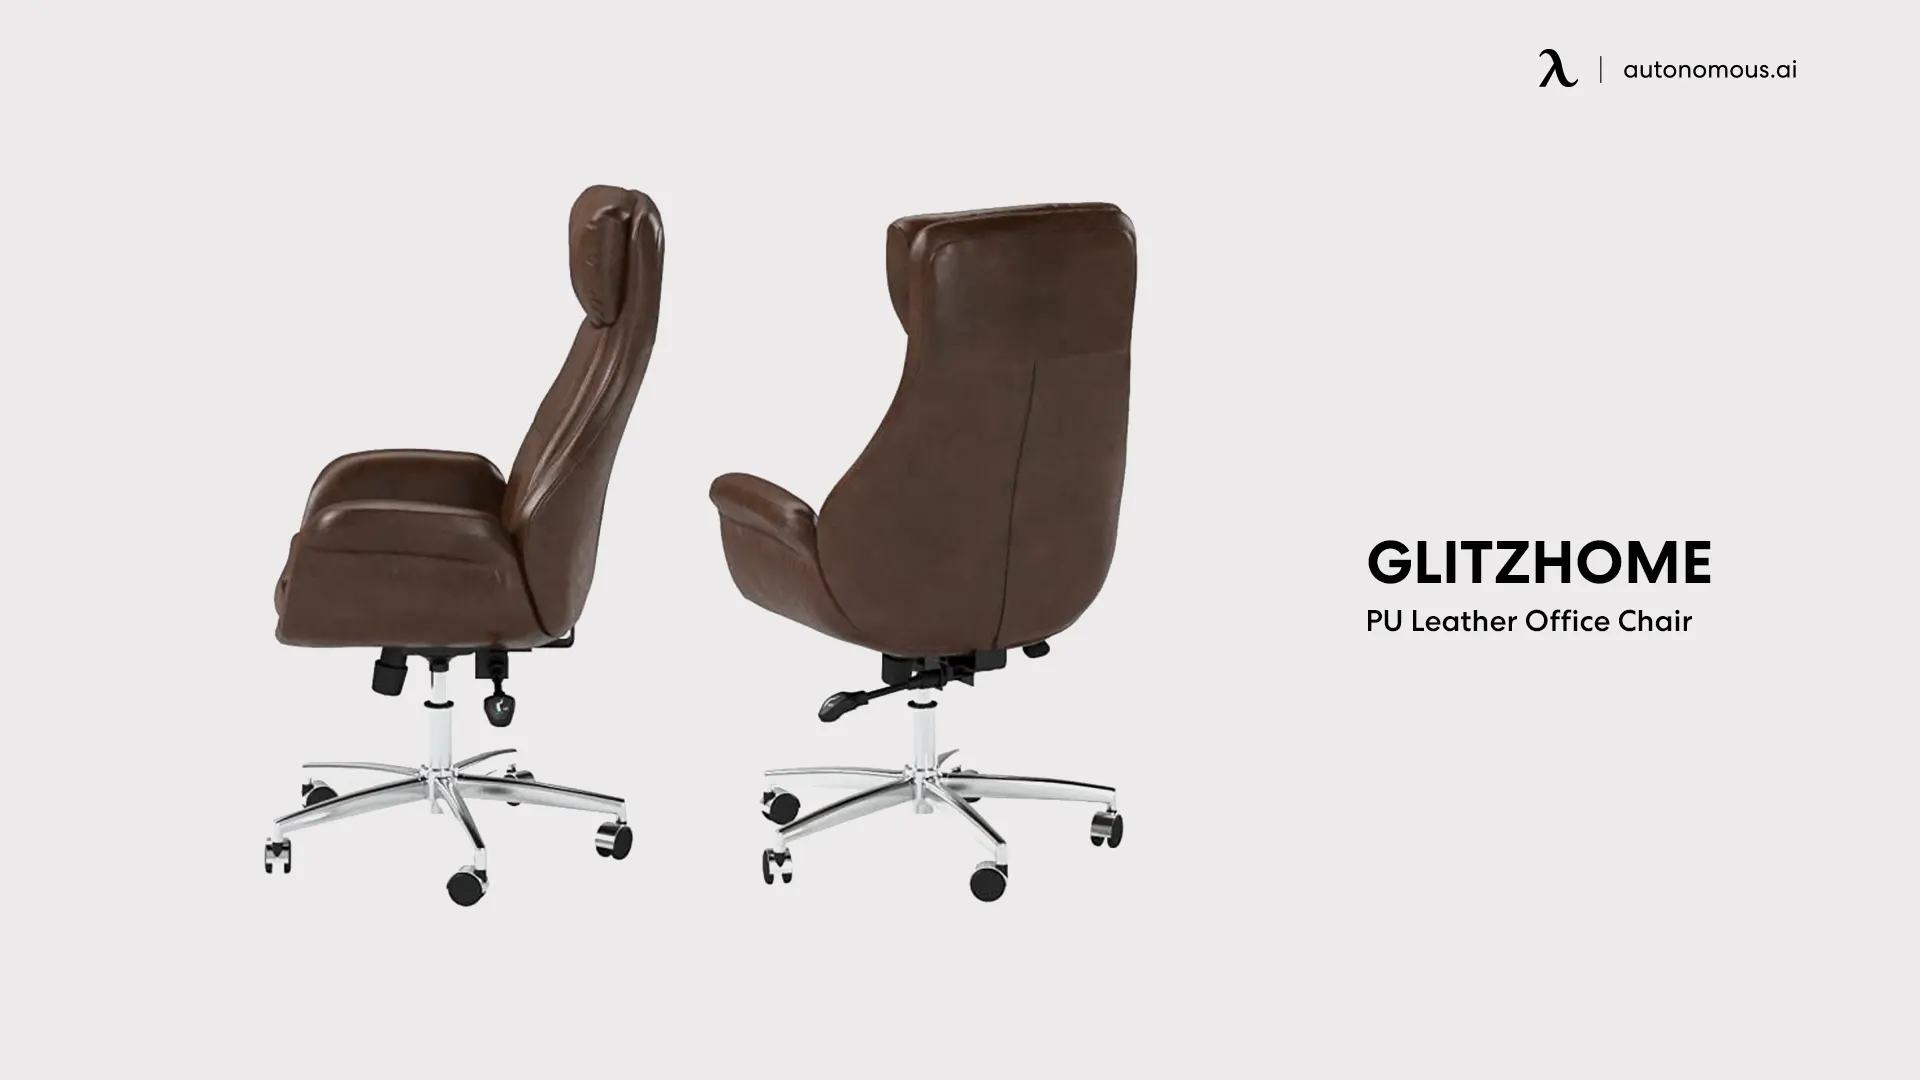 Glitzhome PU Leather Office Chair